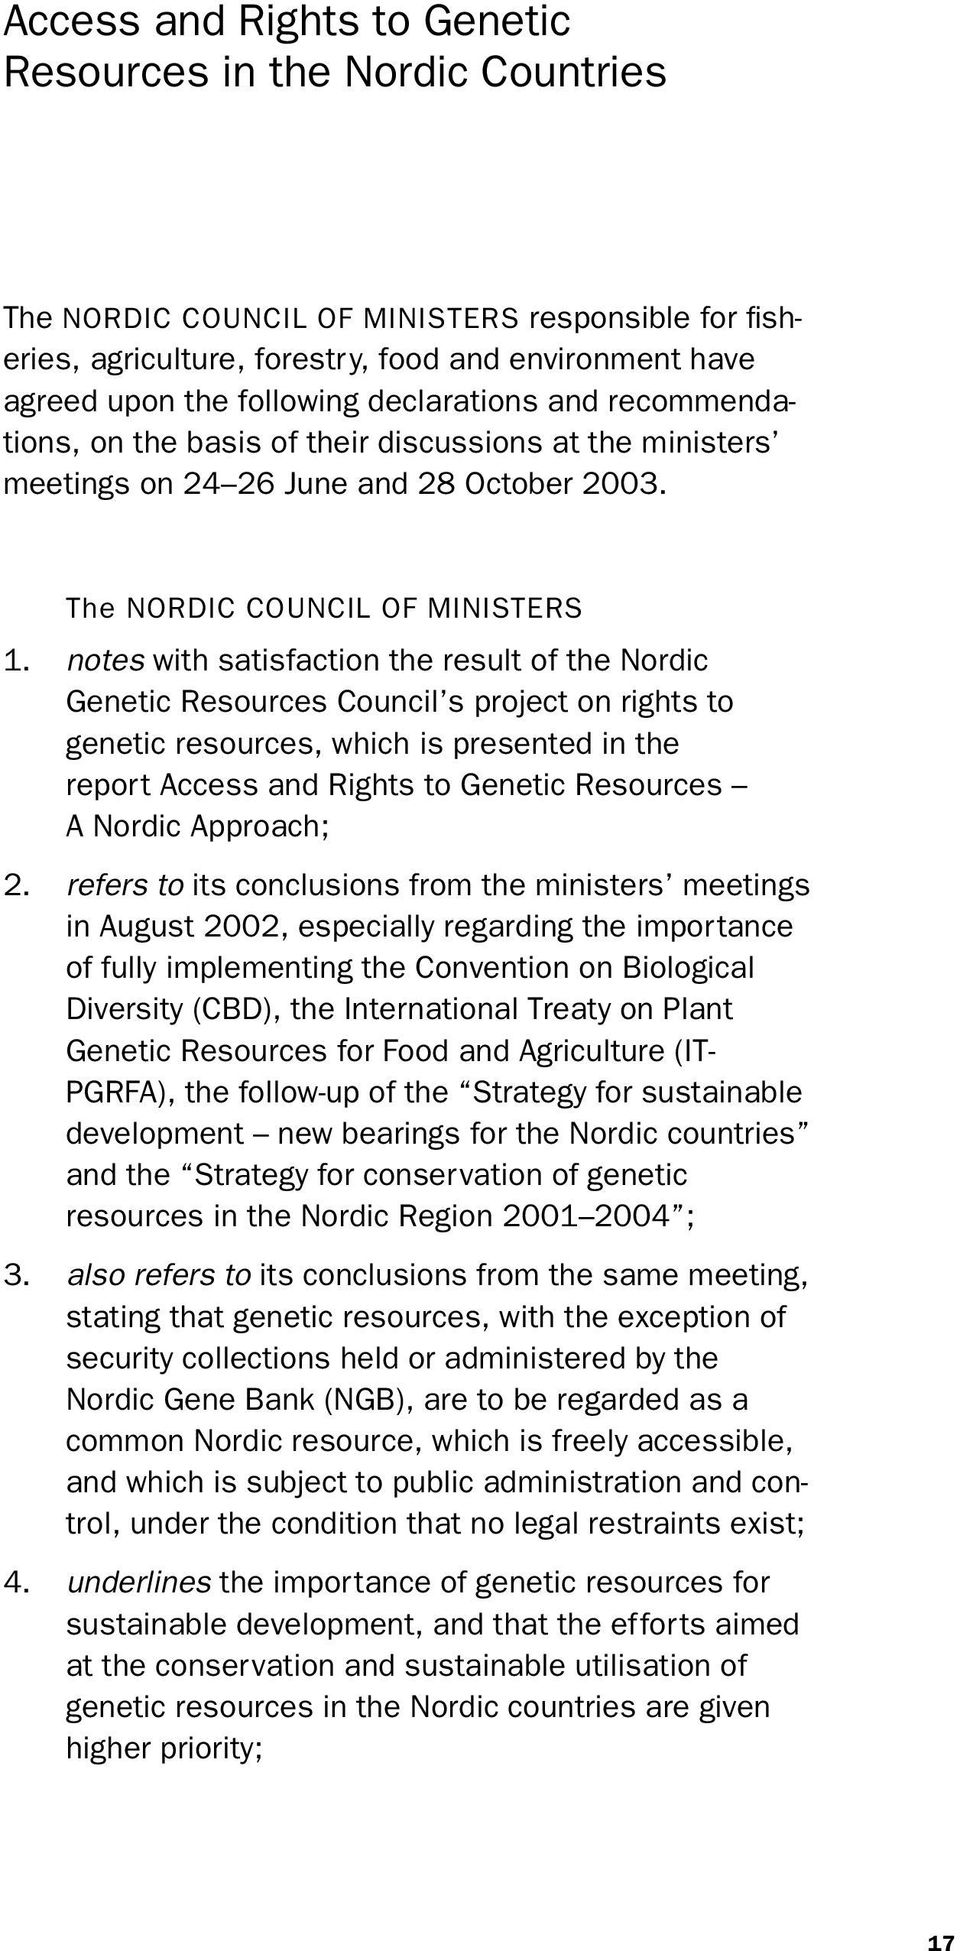 notes with satisfaction the result of the Nordic Genetic Resources Council s project on rights to genetic resources, which is presented in the report Access and Rights to Genetic Resources A Nordic